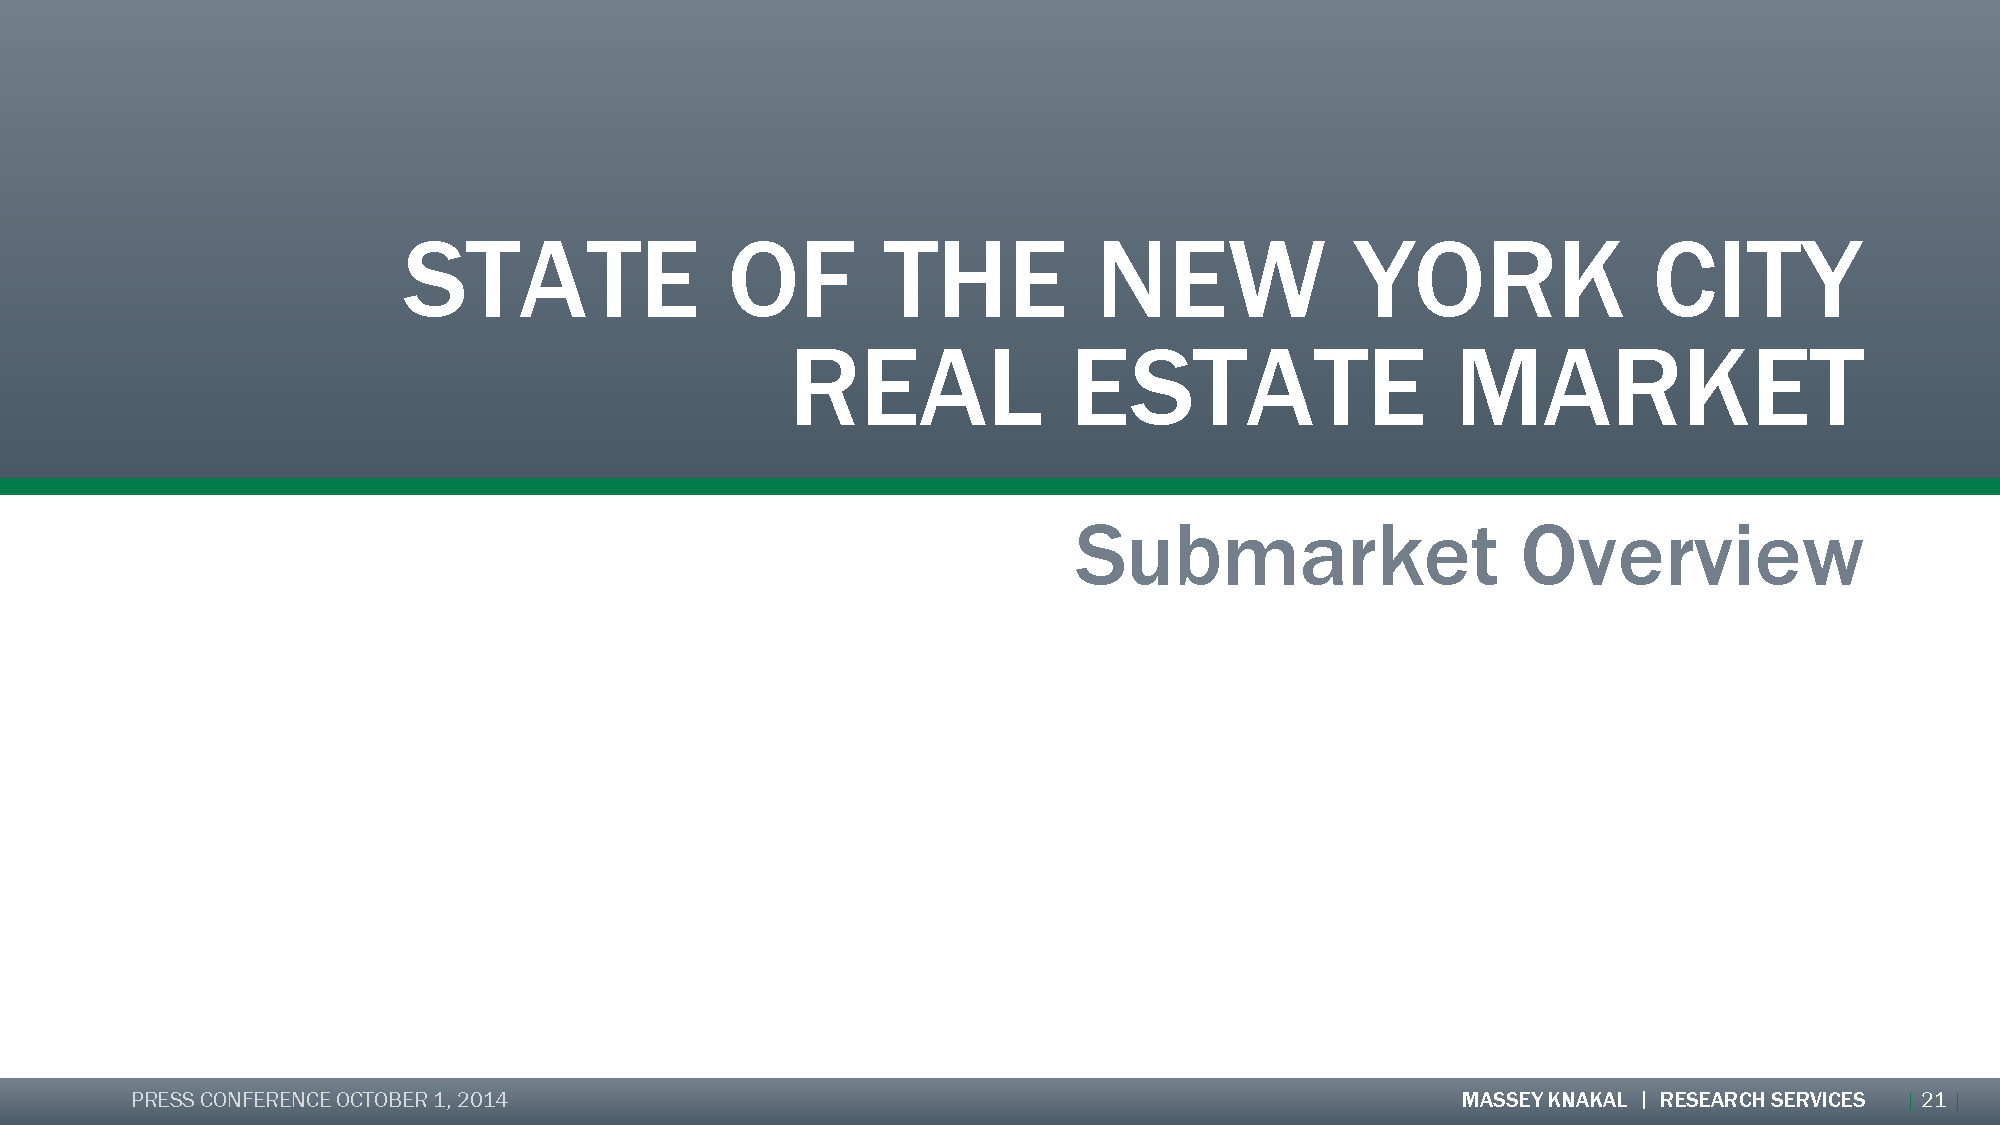 Slides 21-27 (Manhattan) - 3Q14 state of the real estate market 10_01_2014_Page_1